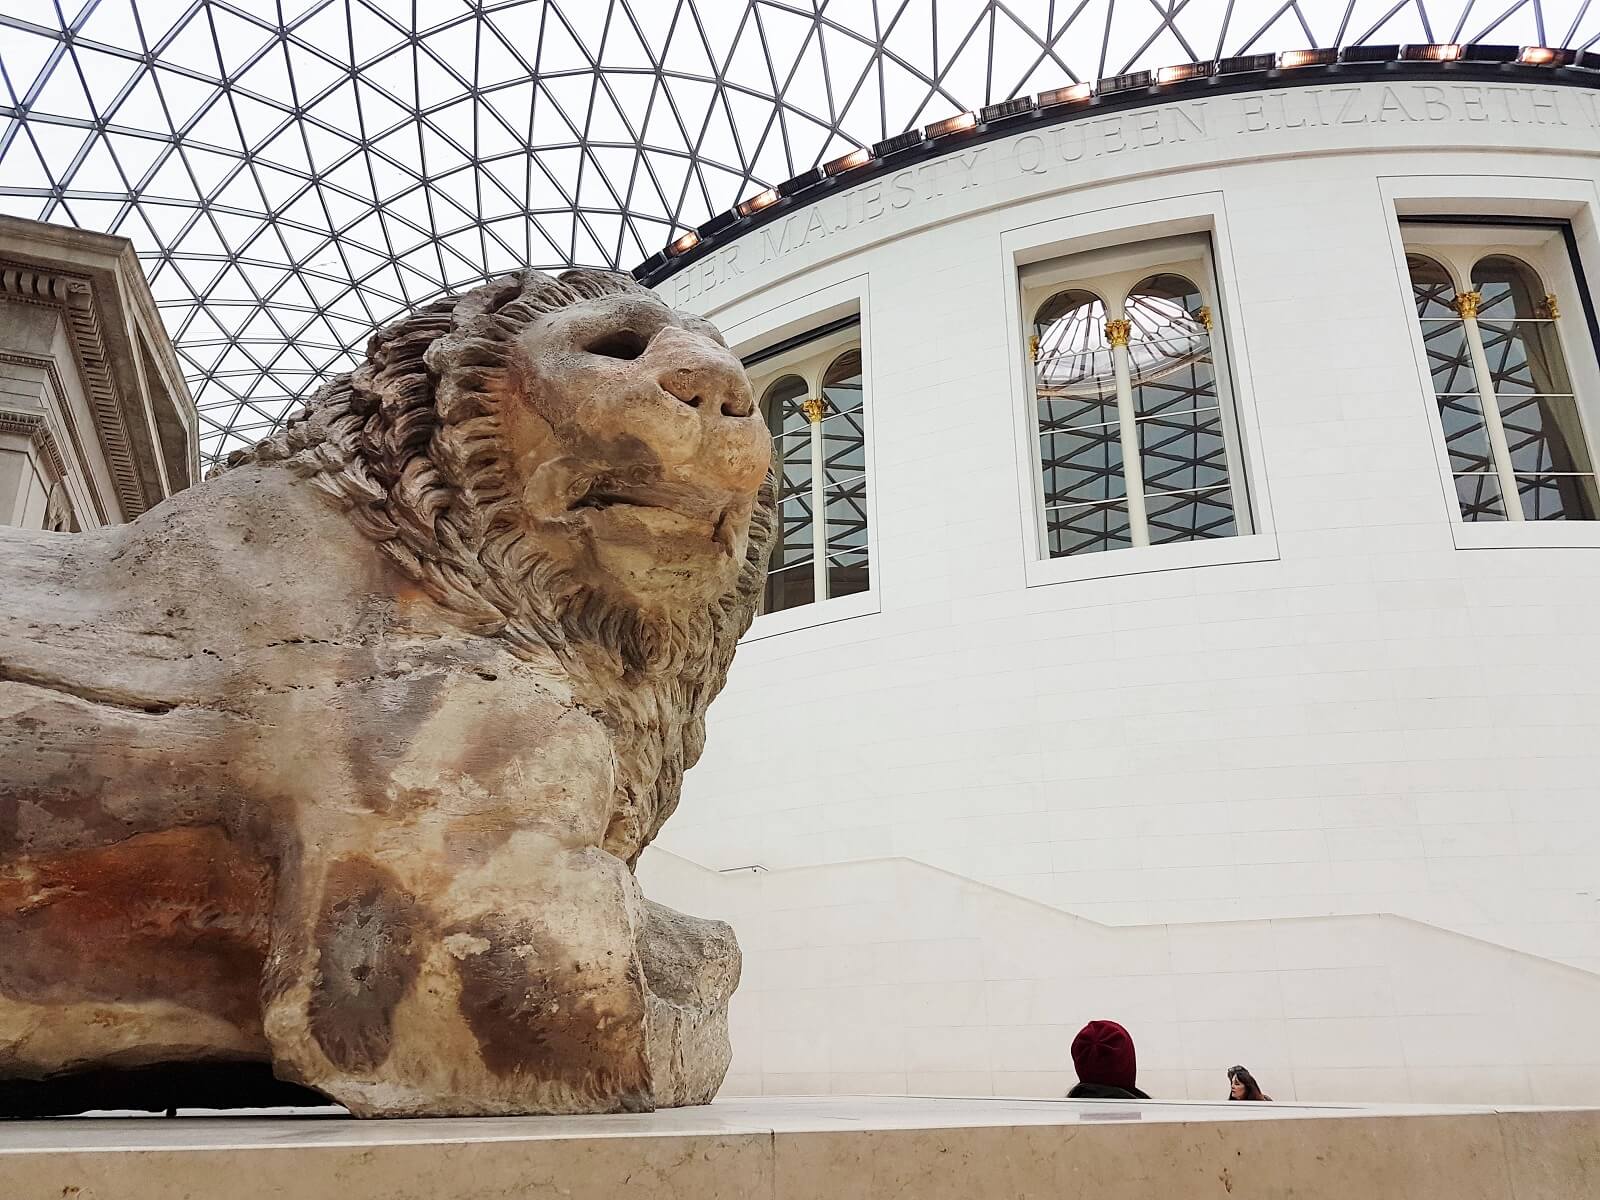 free museums in london / british museum / emma martell